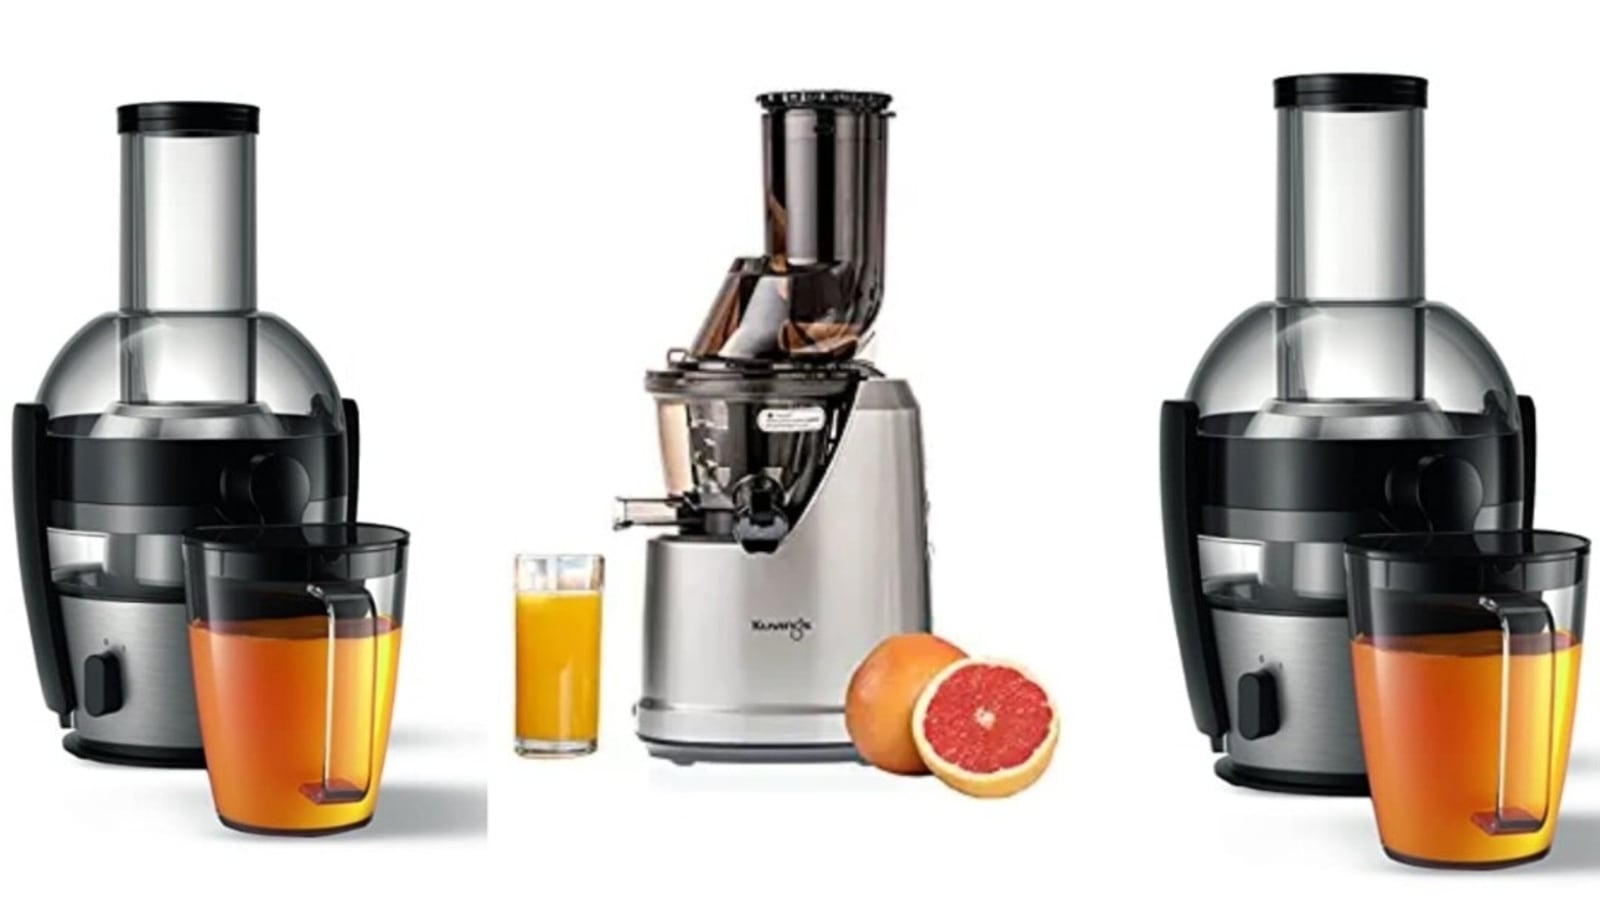 Buy Libra Cold Press juicer Whole Slow Juicer with Powerful 240